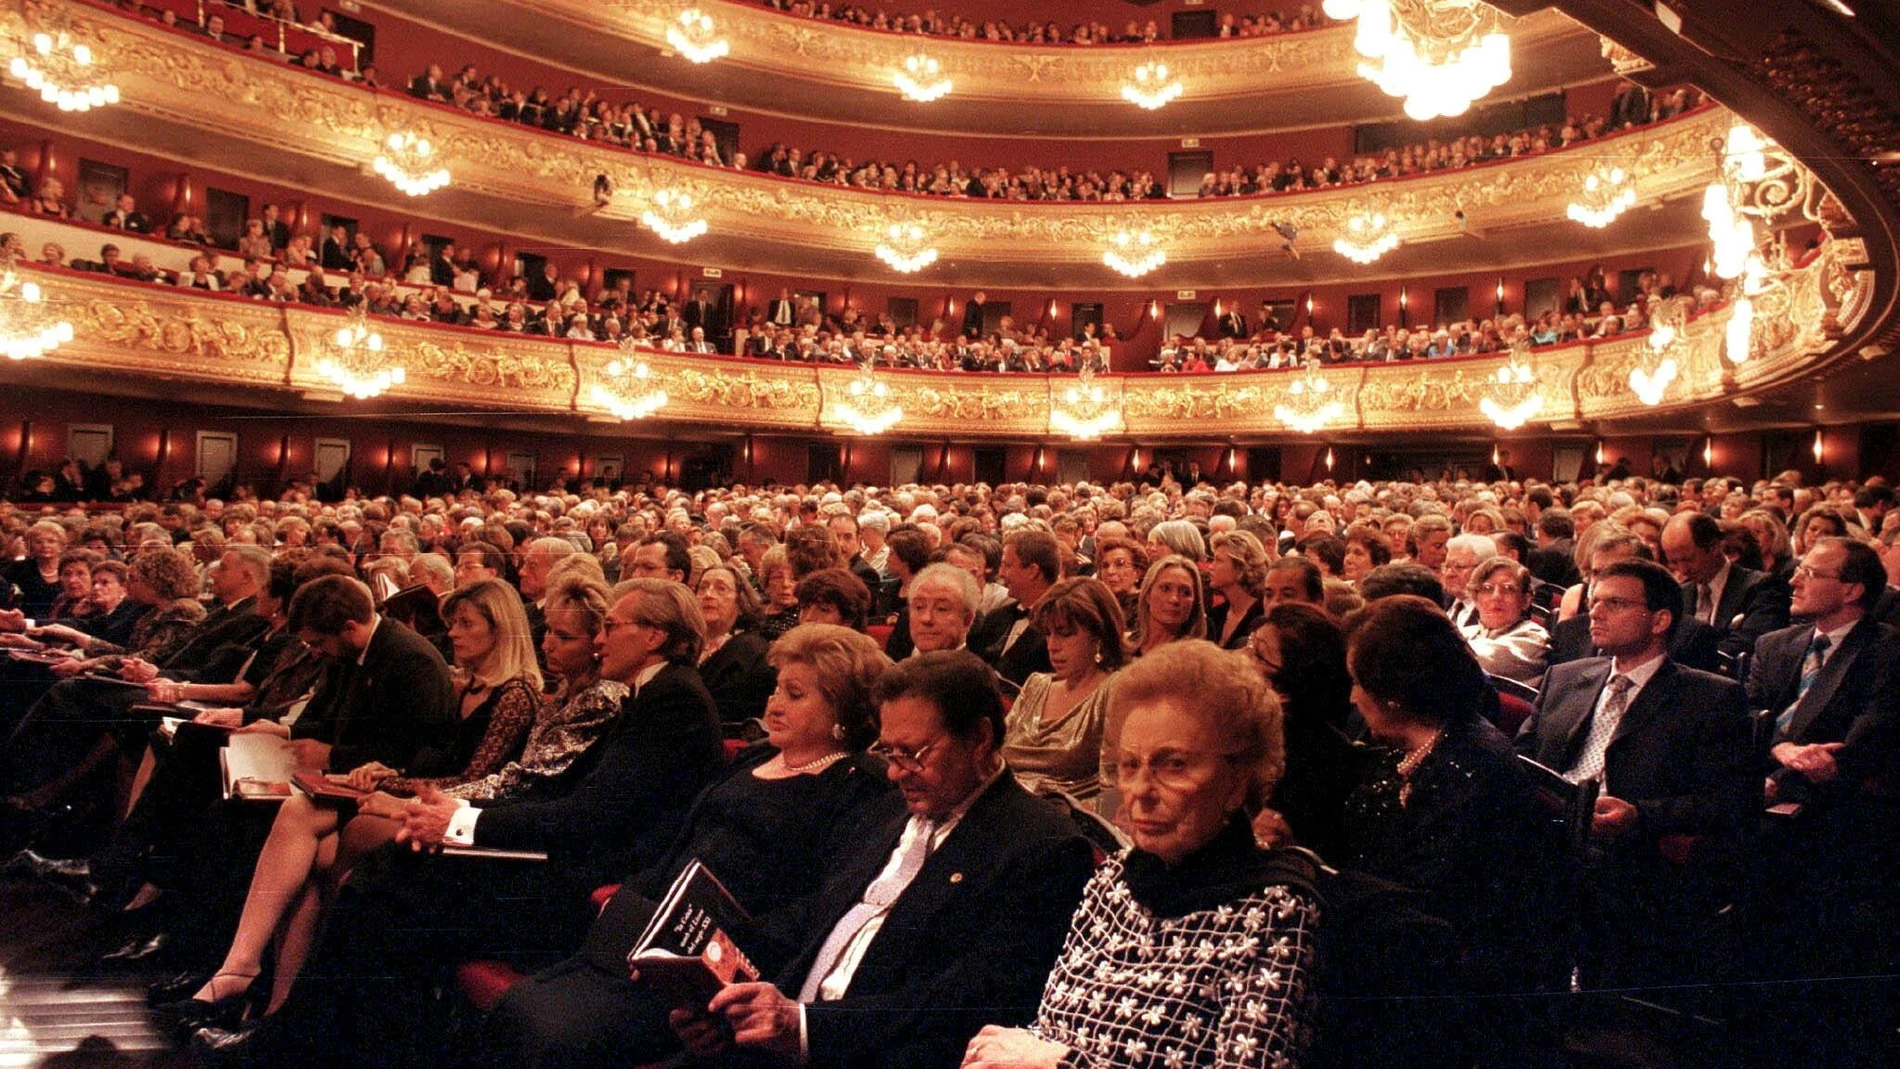 The audience prepares to watch Giacomo Puccini's Turandot opera in the newly rebuilt Liceu Opera House in Barcelona Thursday Oct. 7 1999 that opened its doors for the first time since the January 1994 fire that completely gutted the building. (AP Photo/Pool/Andreu Dalmau/EFE)